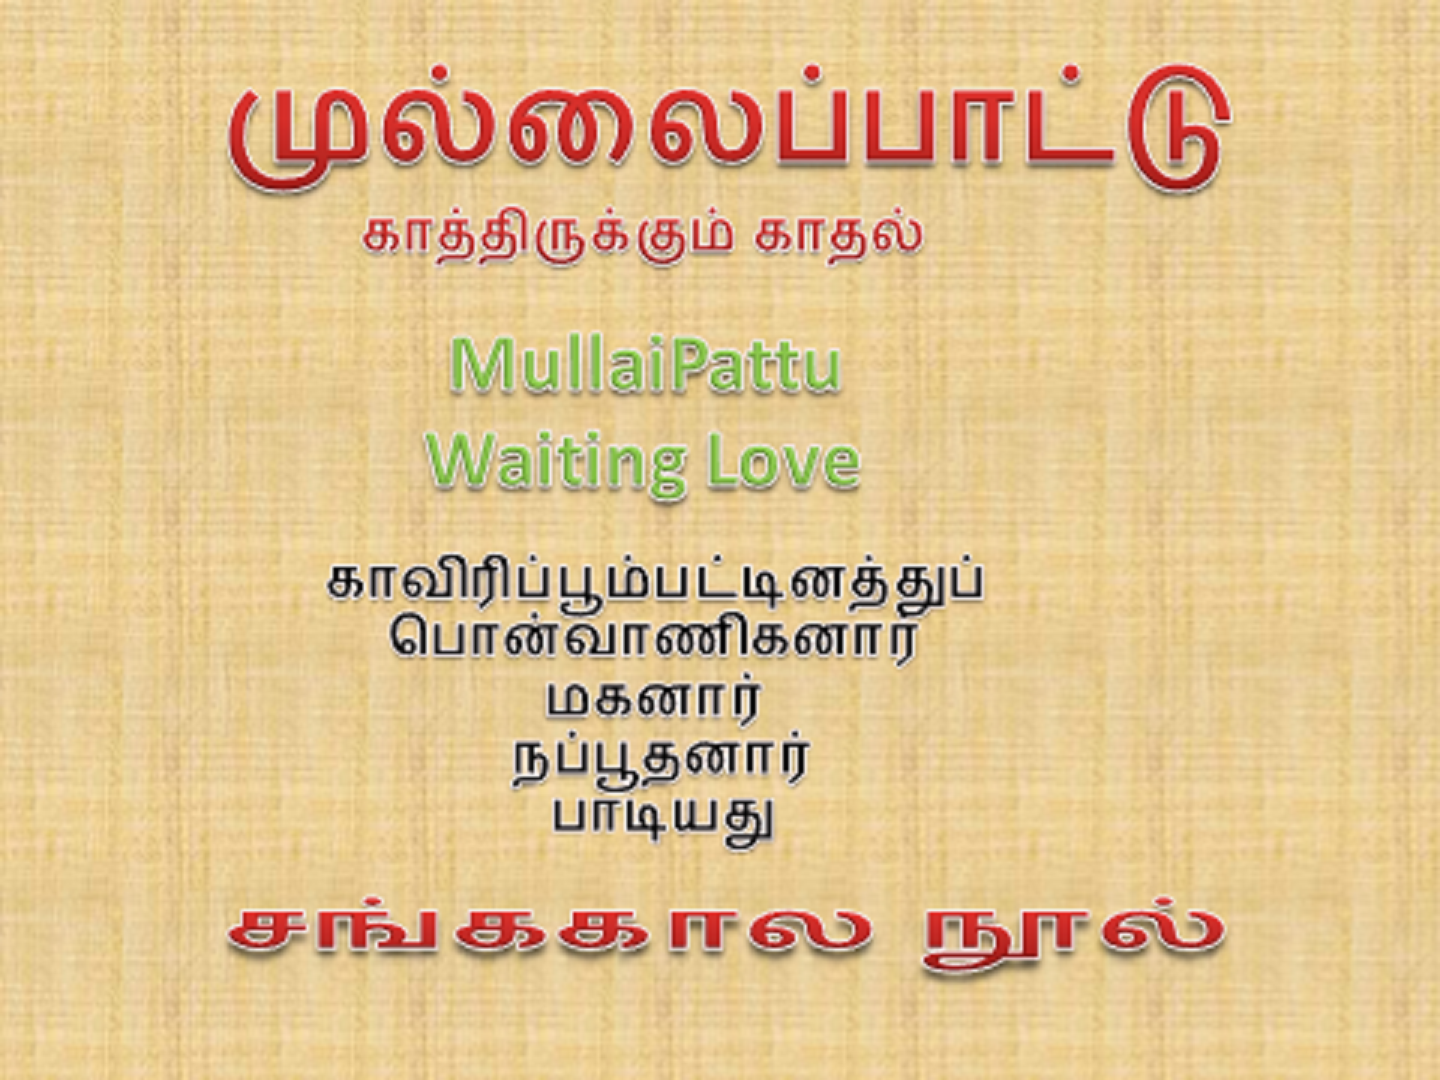 Tamil Meaning of Stream (as In Blood Stream) - அருவி